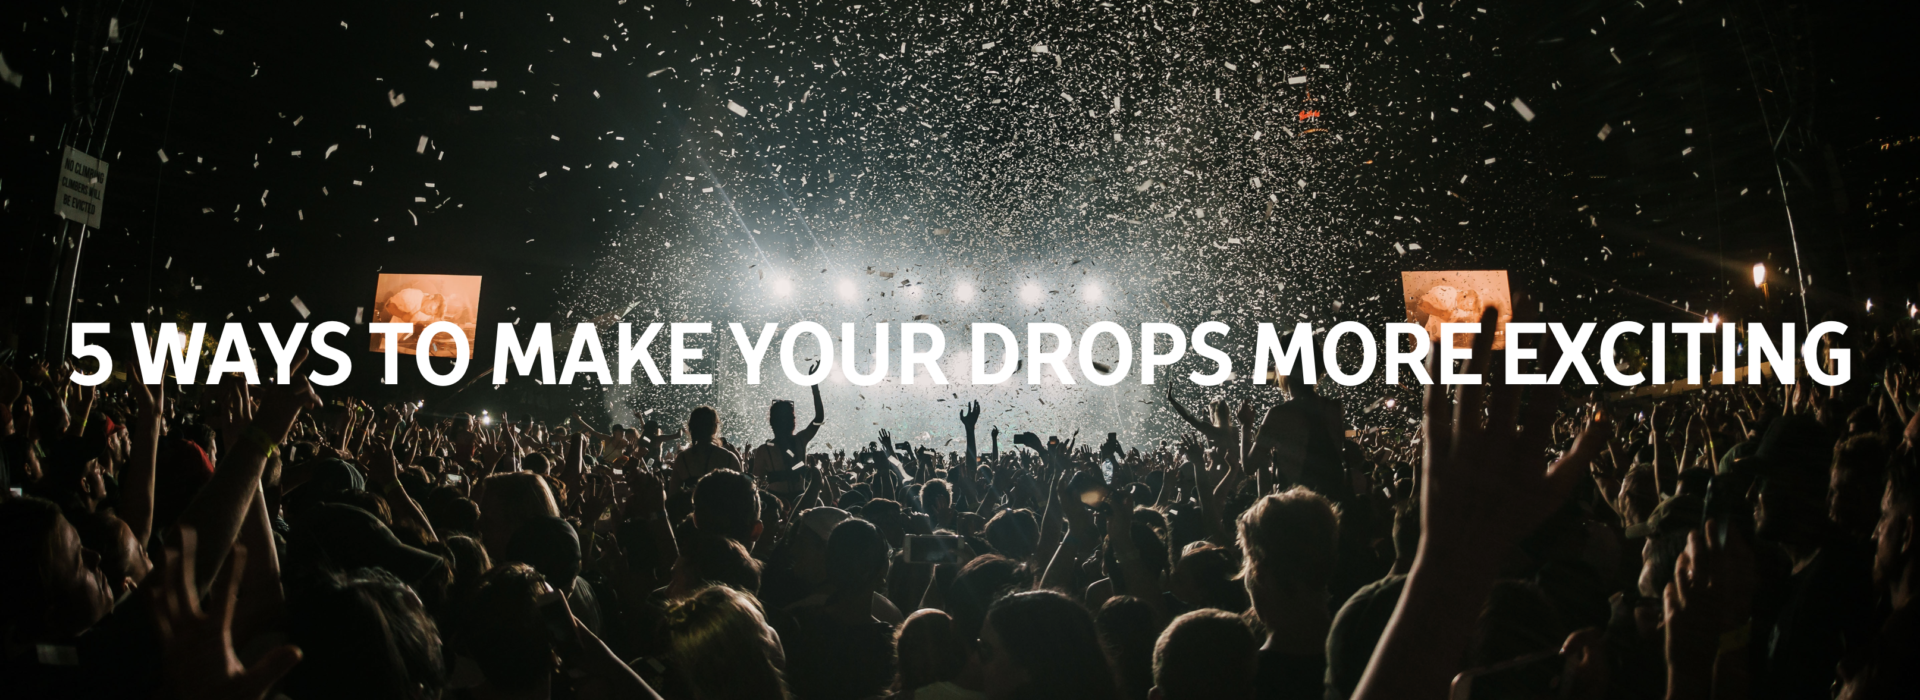 5 Ways to Make Your Drops More Exciting